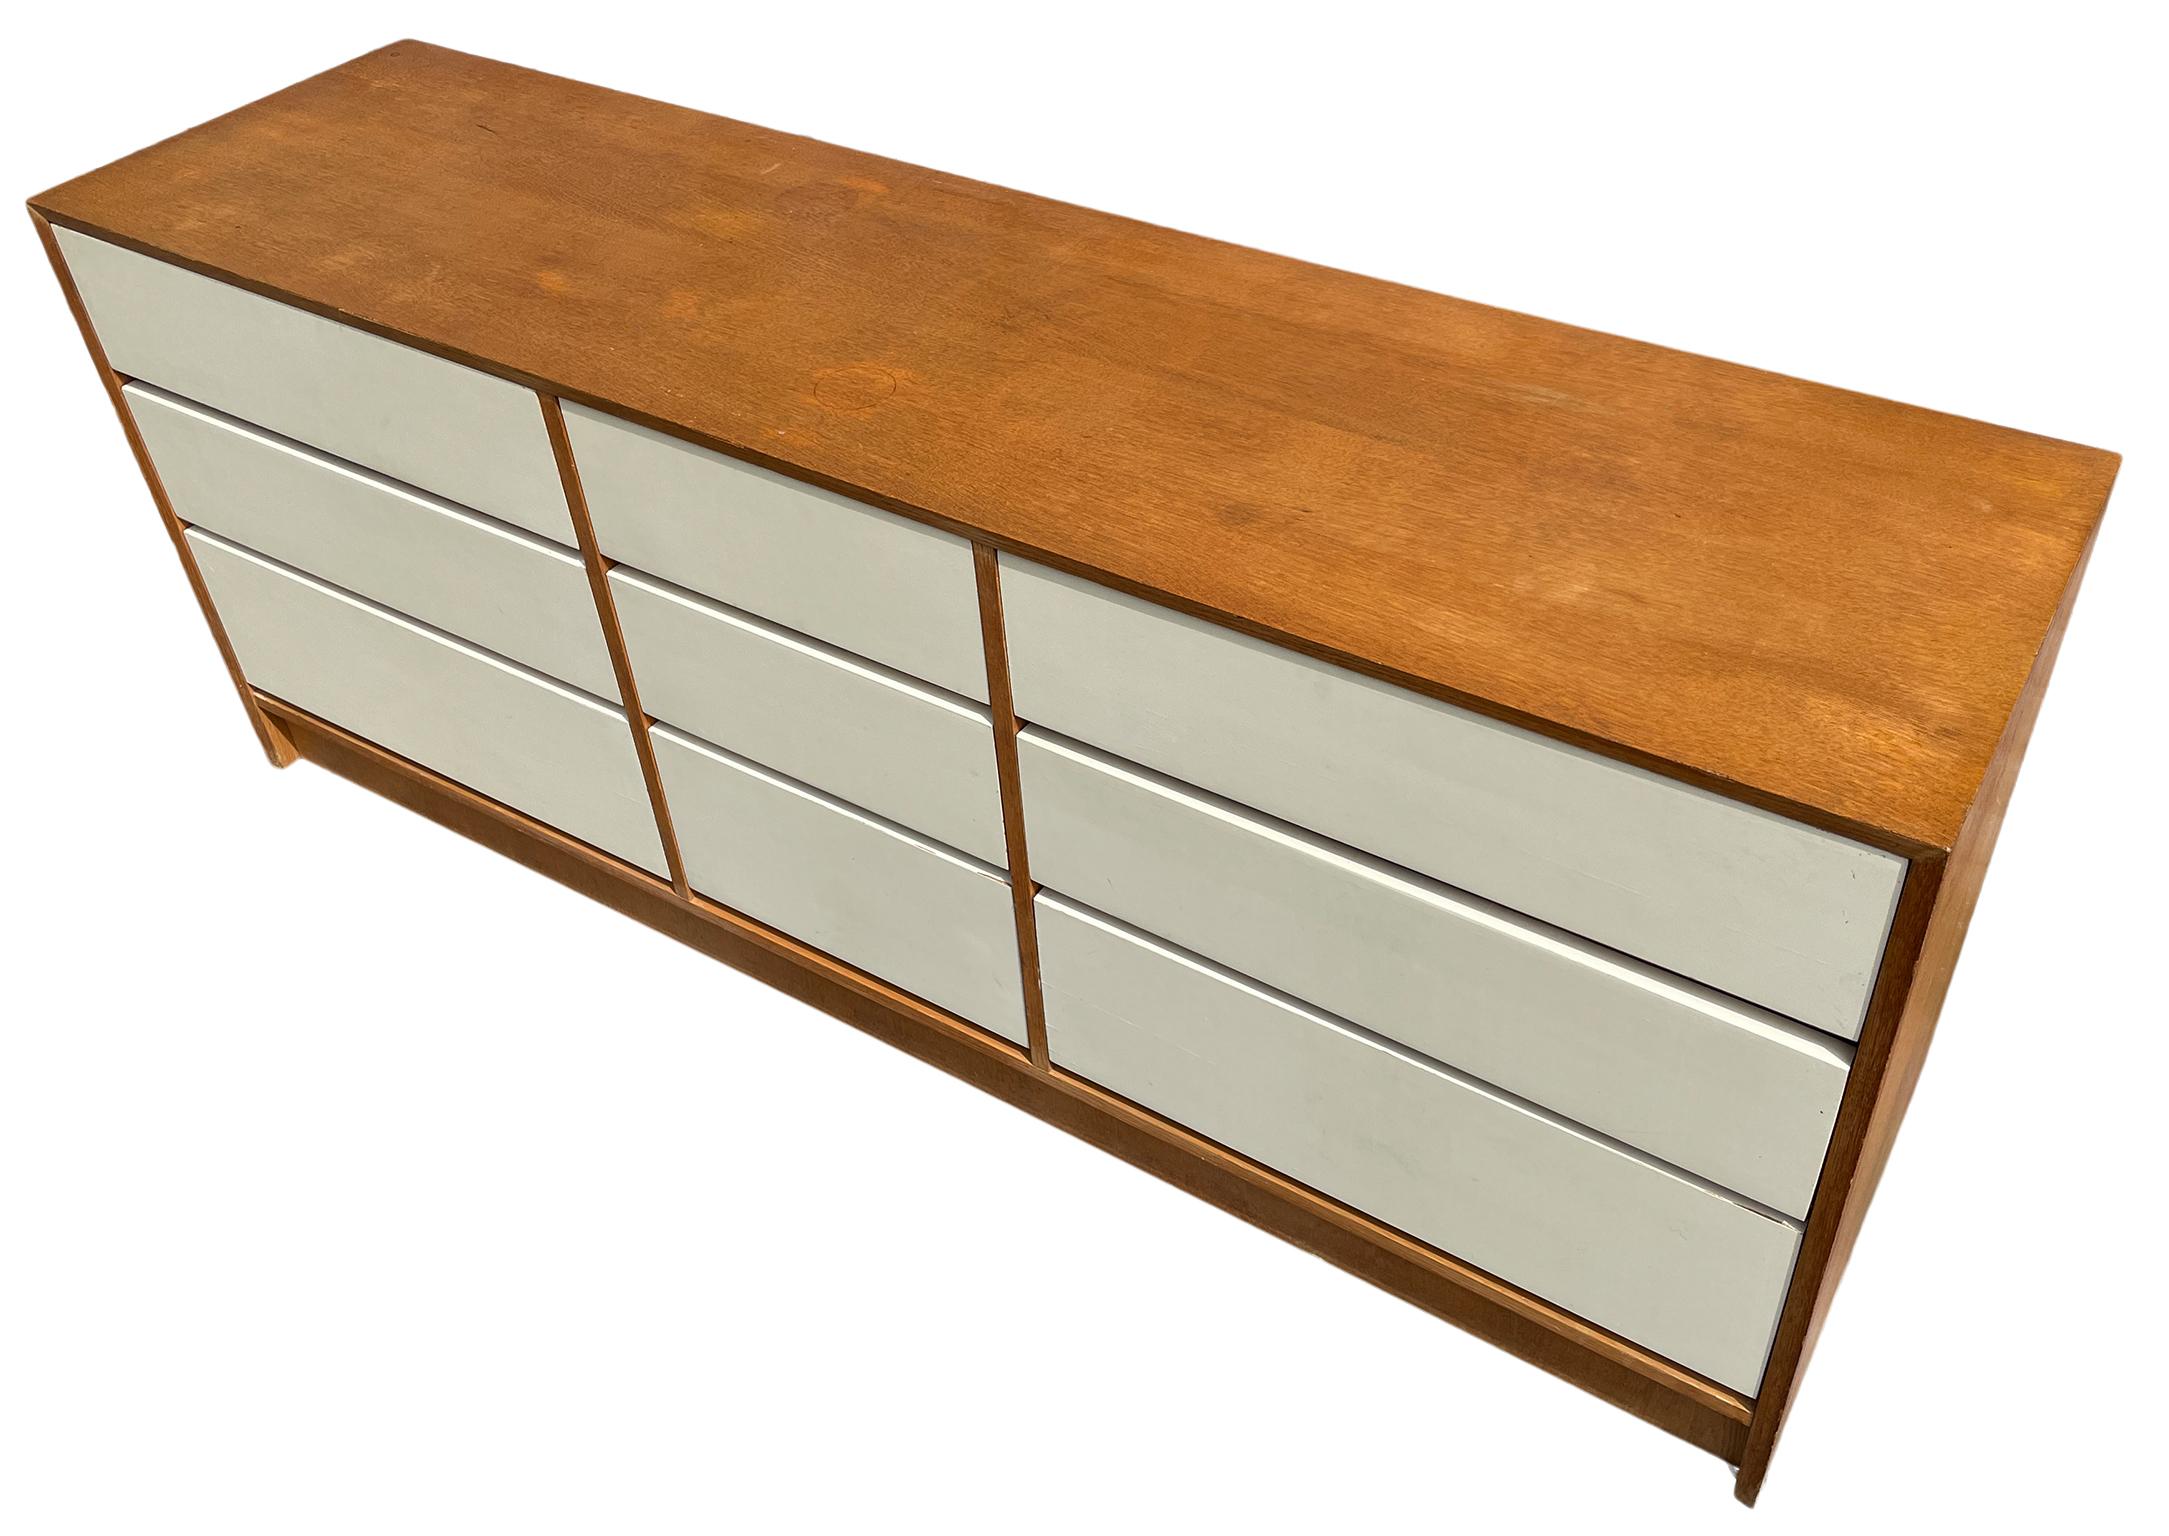 Woodwork Mid Century Modern 9 Drawer oak Credenza or Dresser Lacquer drawers